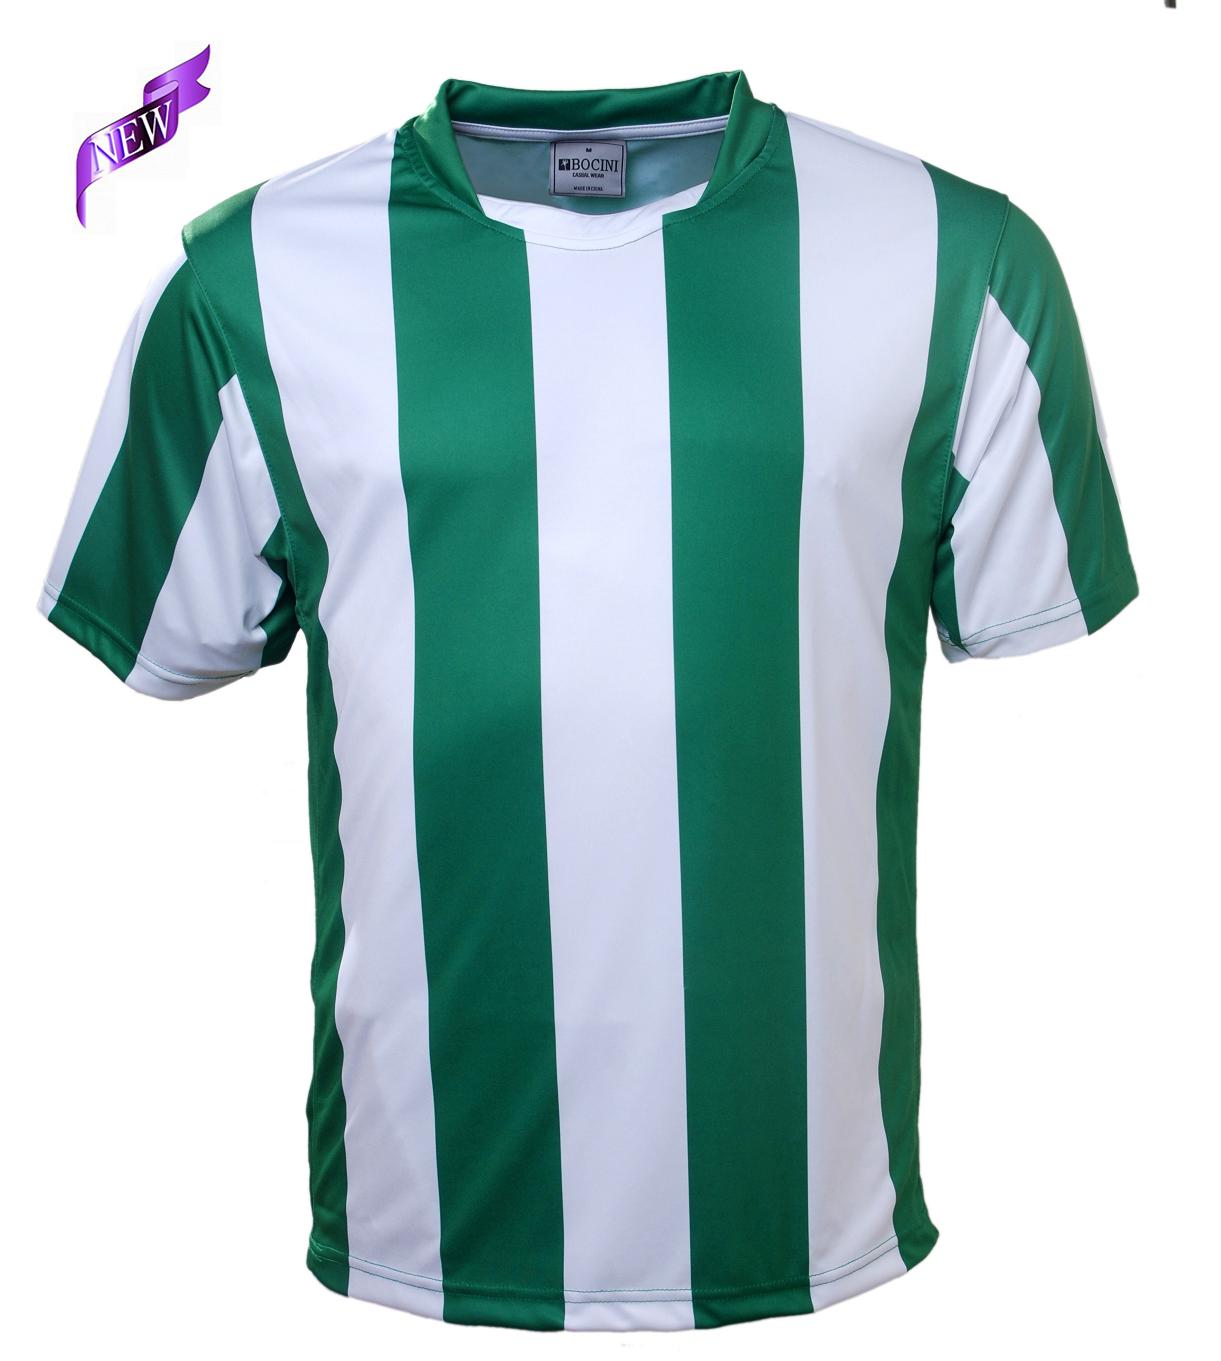 green and white soccer jersey